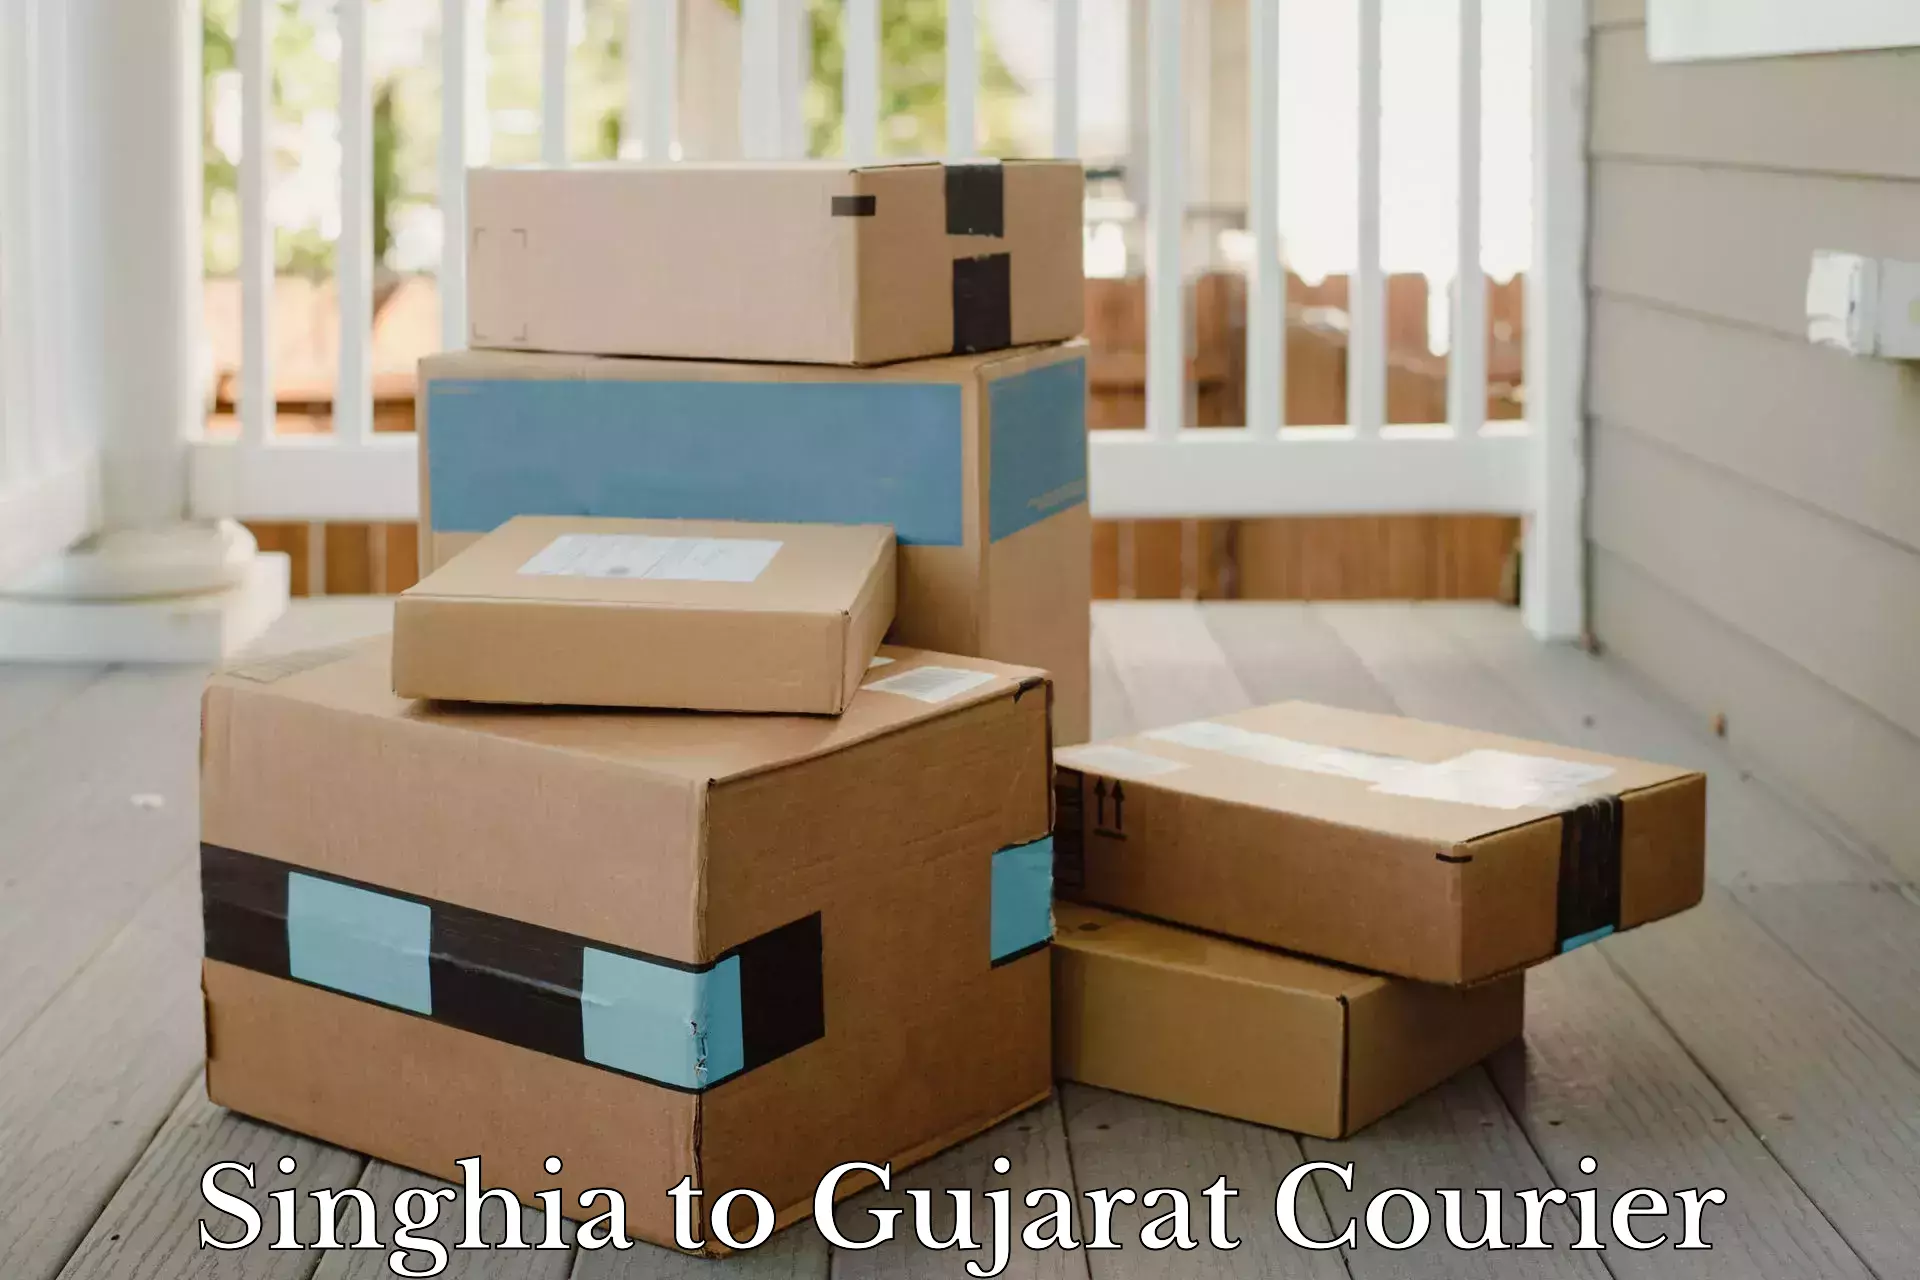 24/7 courier service in Singhia to Gujarat